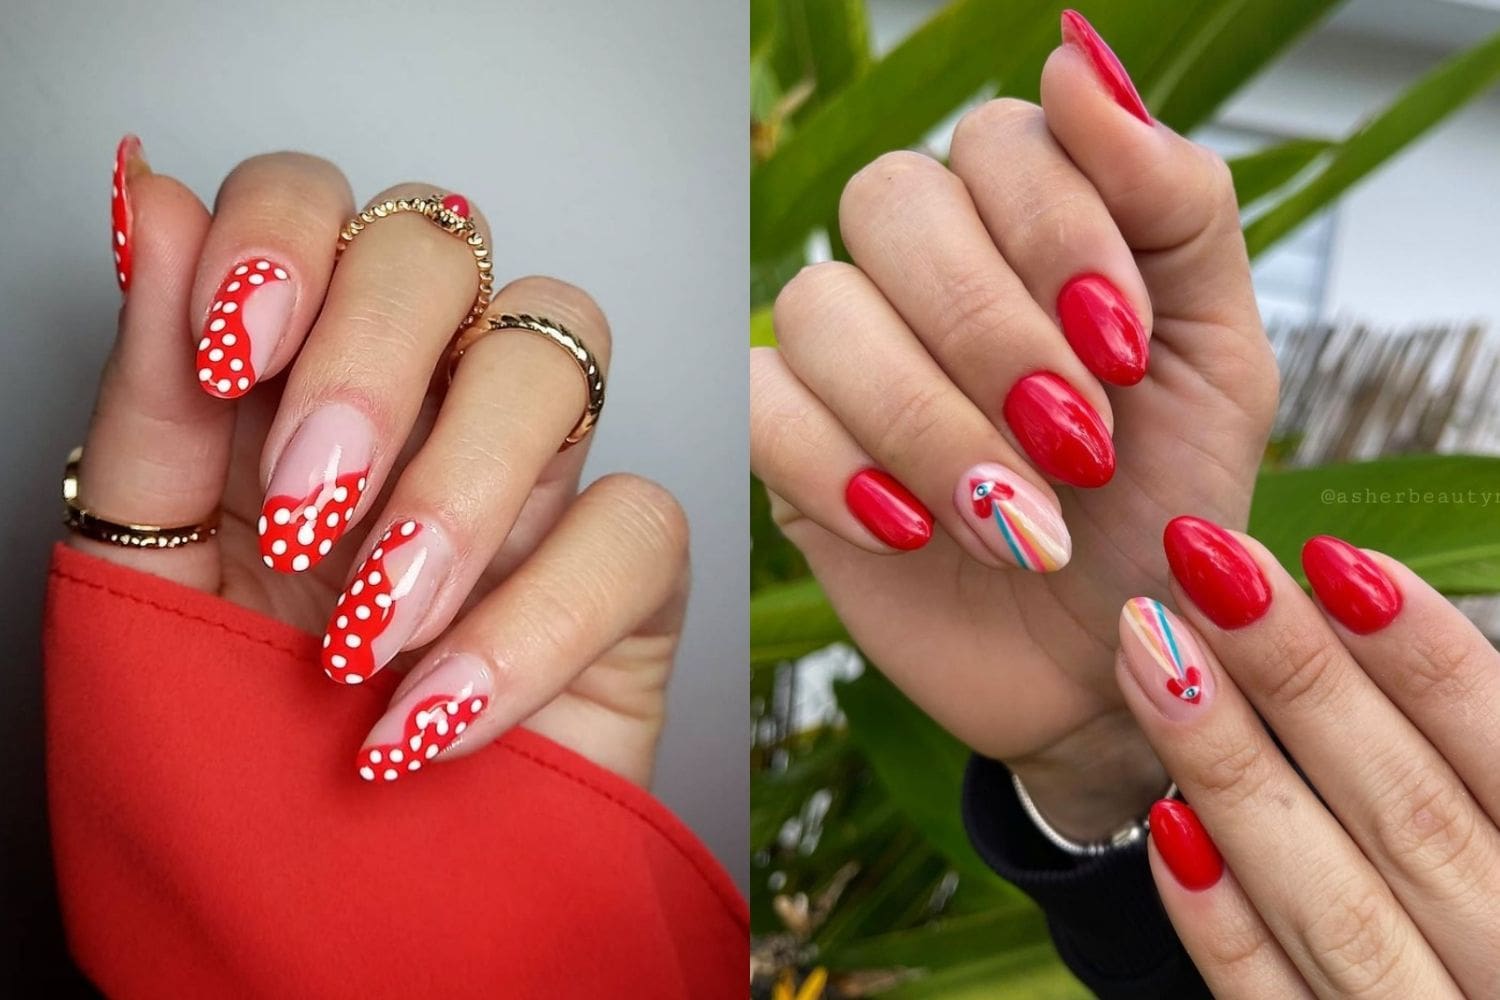 18 Red Nails Design Ideas for When You're Feeling Bold - Let's Eat Cake